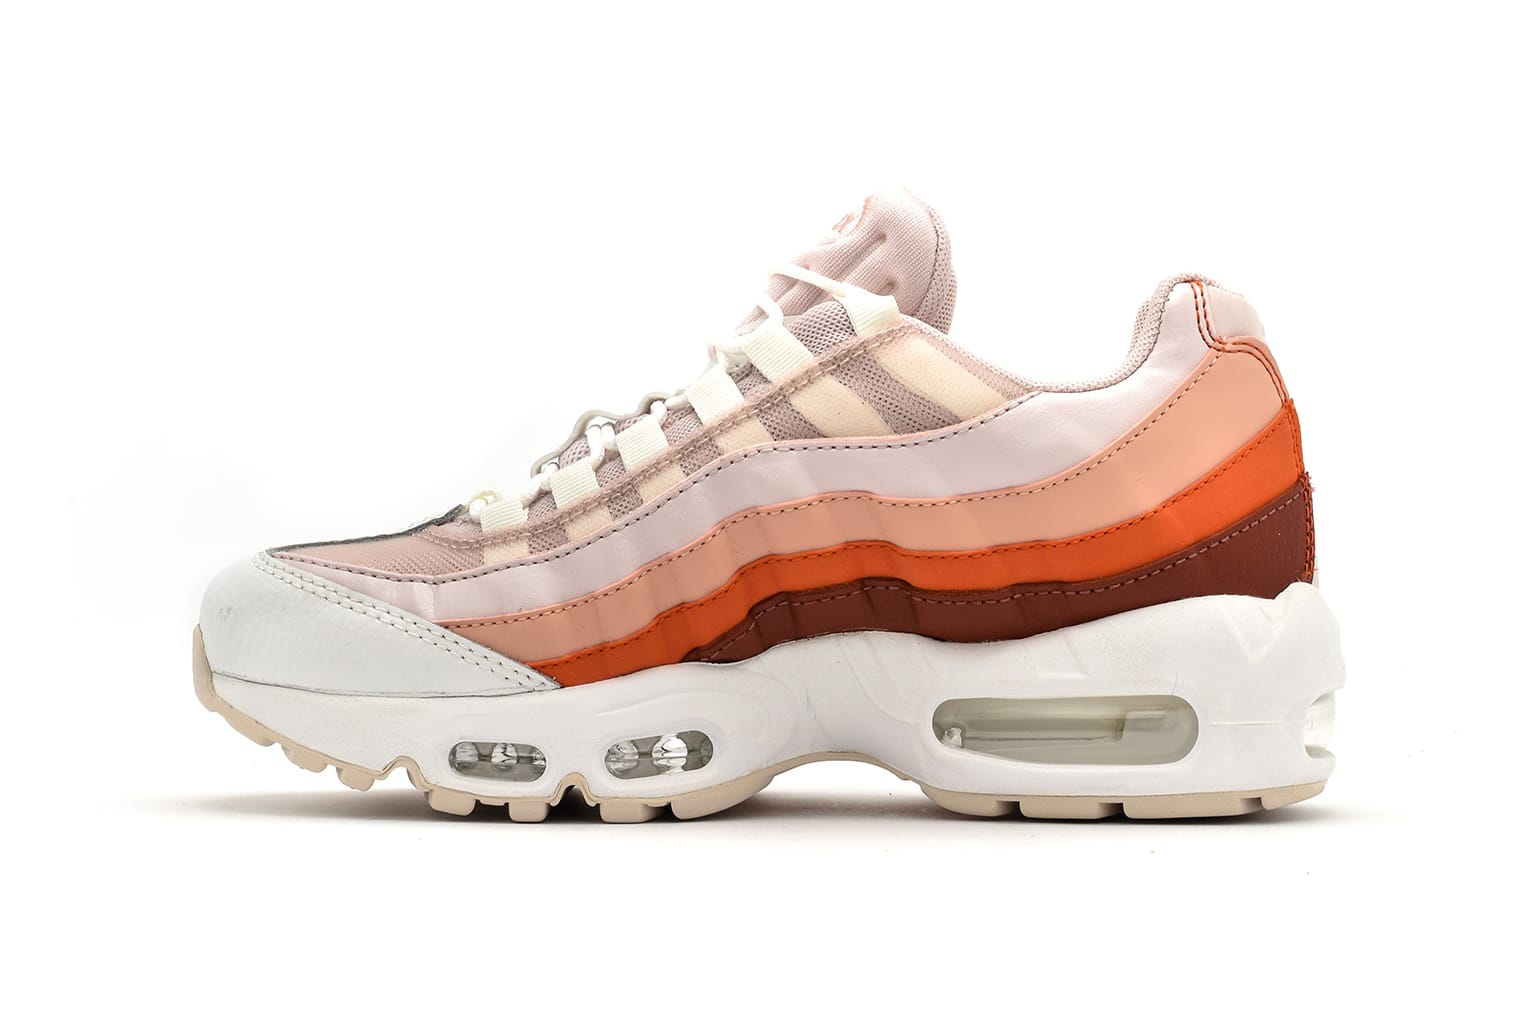 Nike Air Max 95 in Barely Rose Coral 